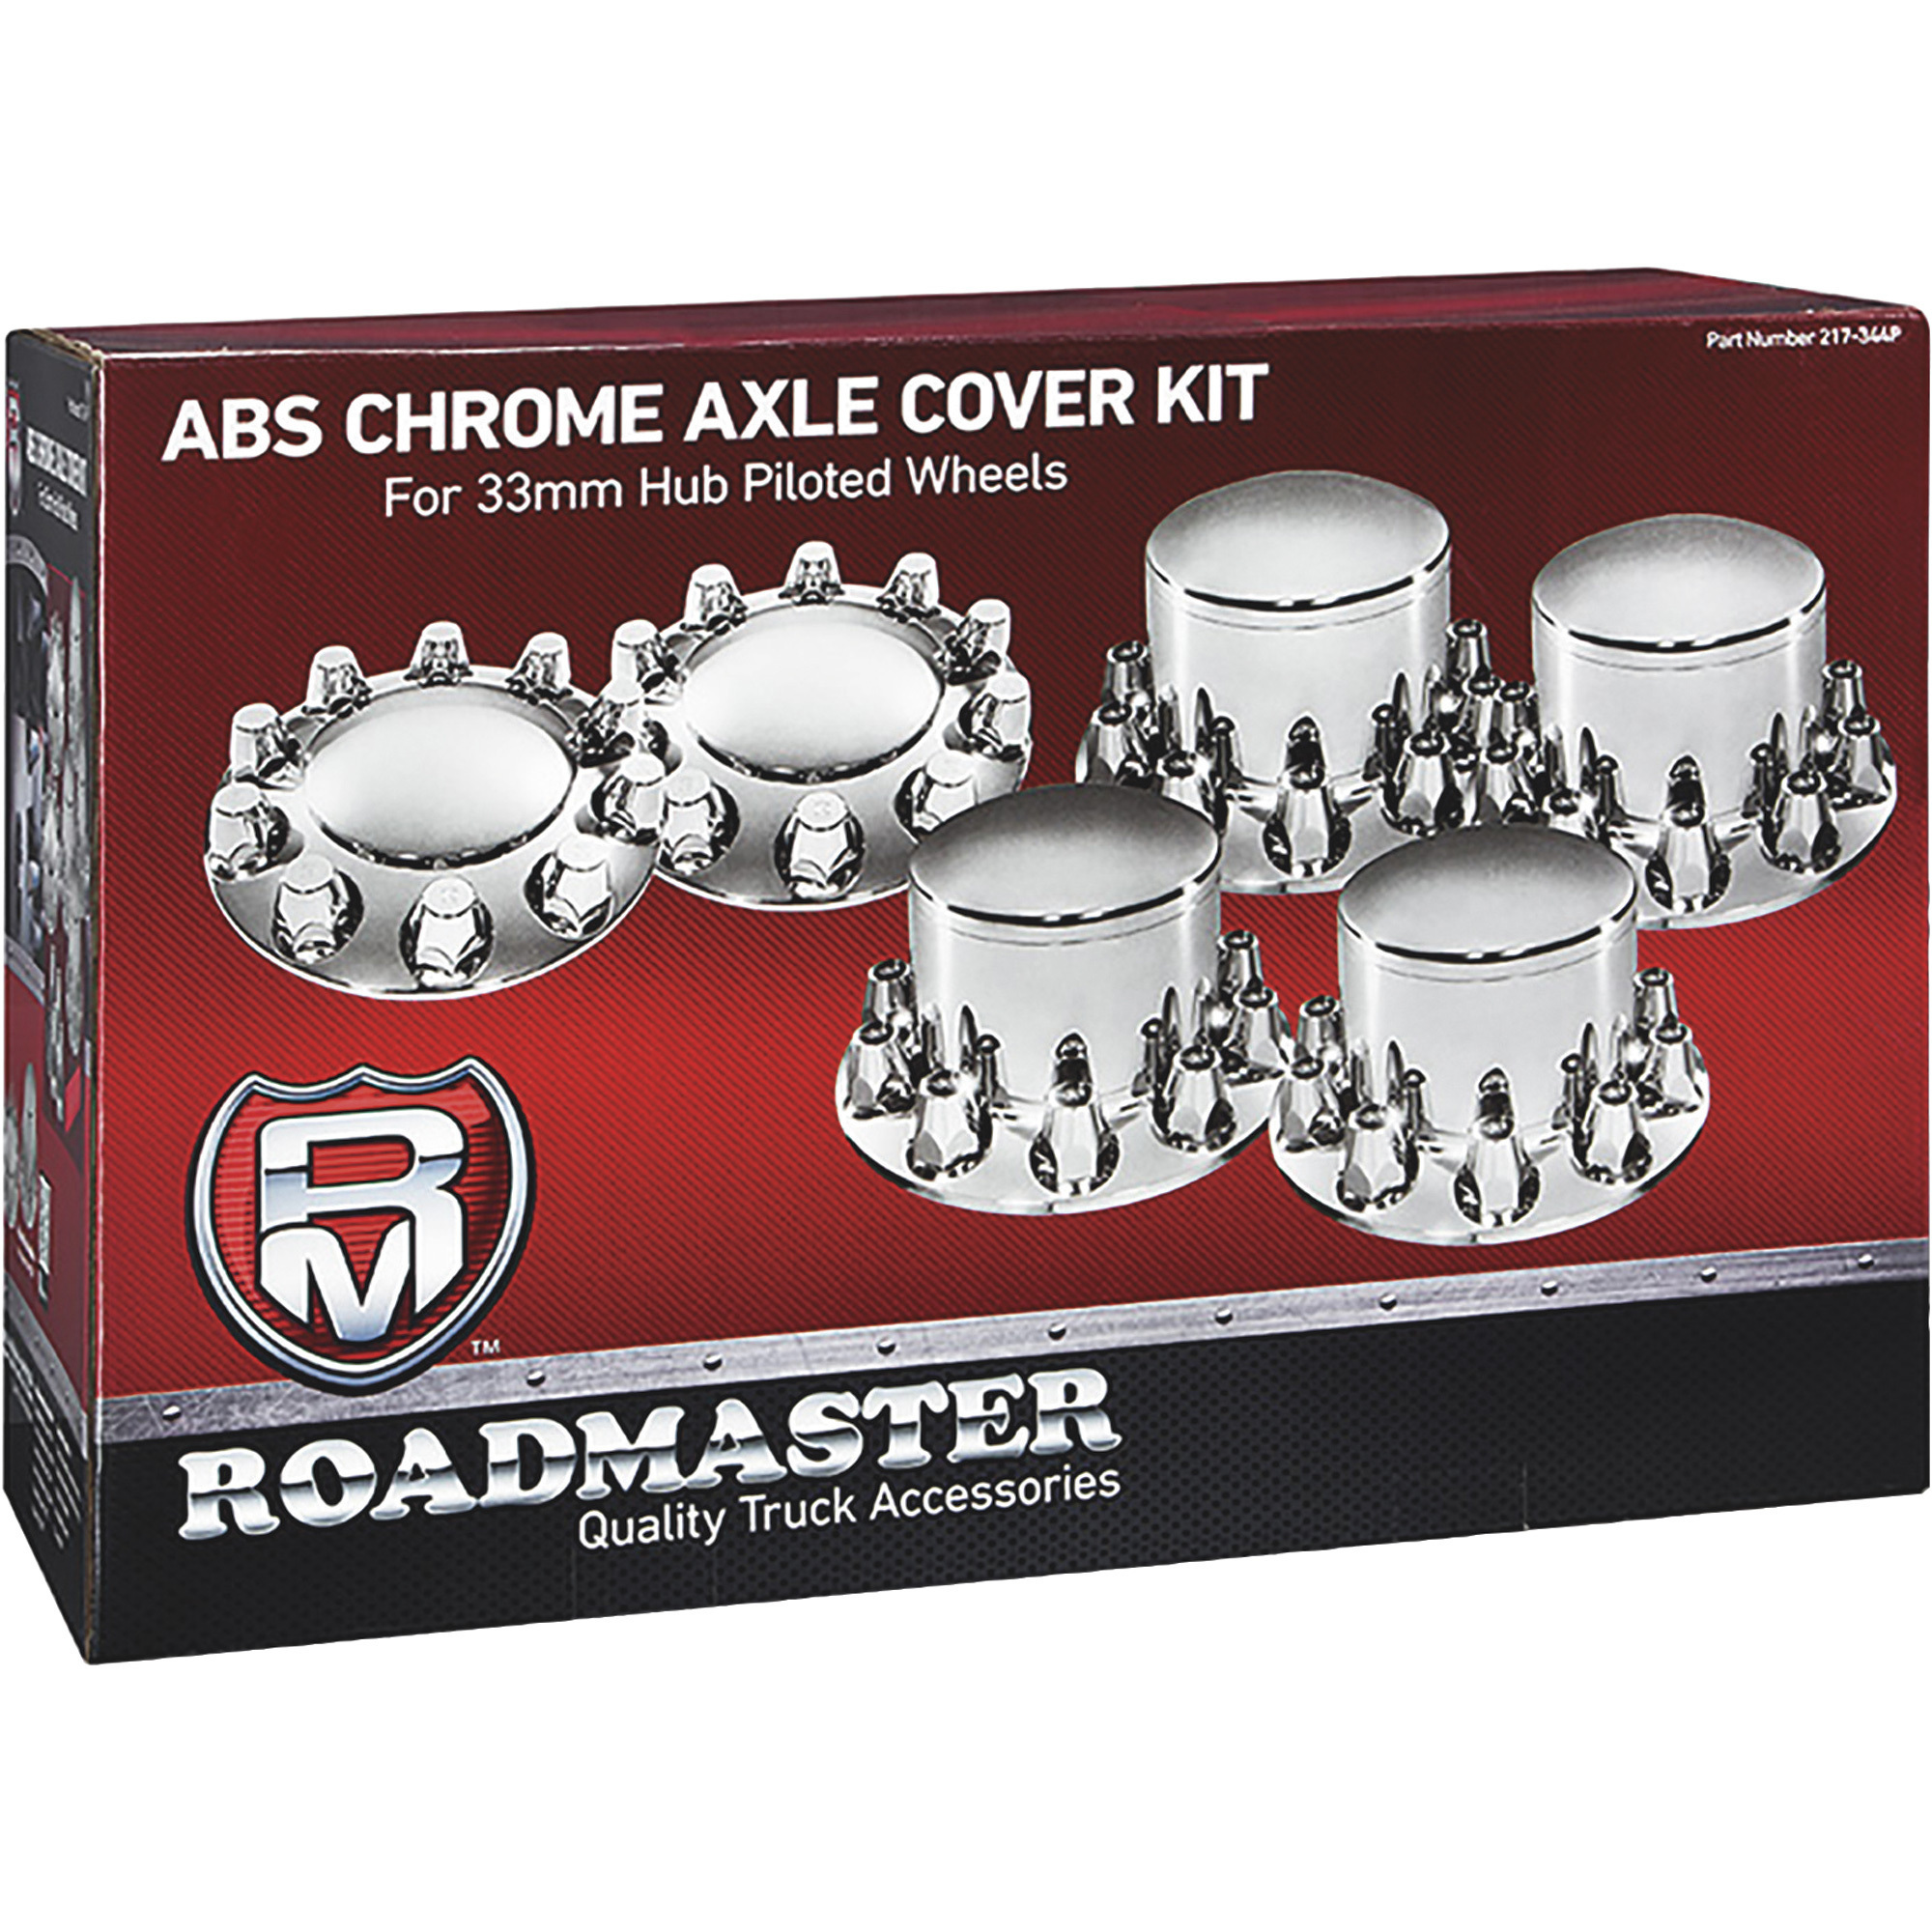 Roadmaster ABS Axle Cover Kit â Chrome, Model 217-344P